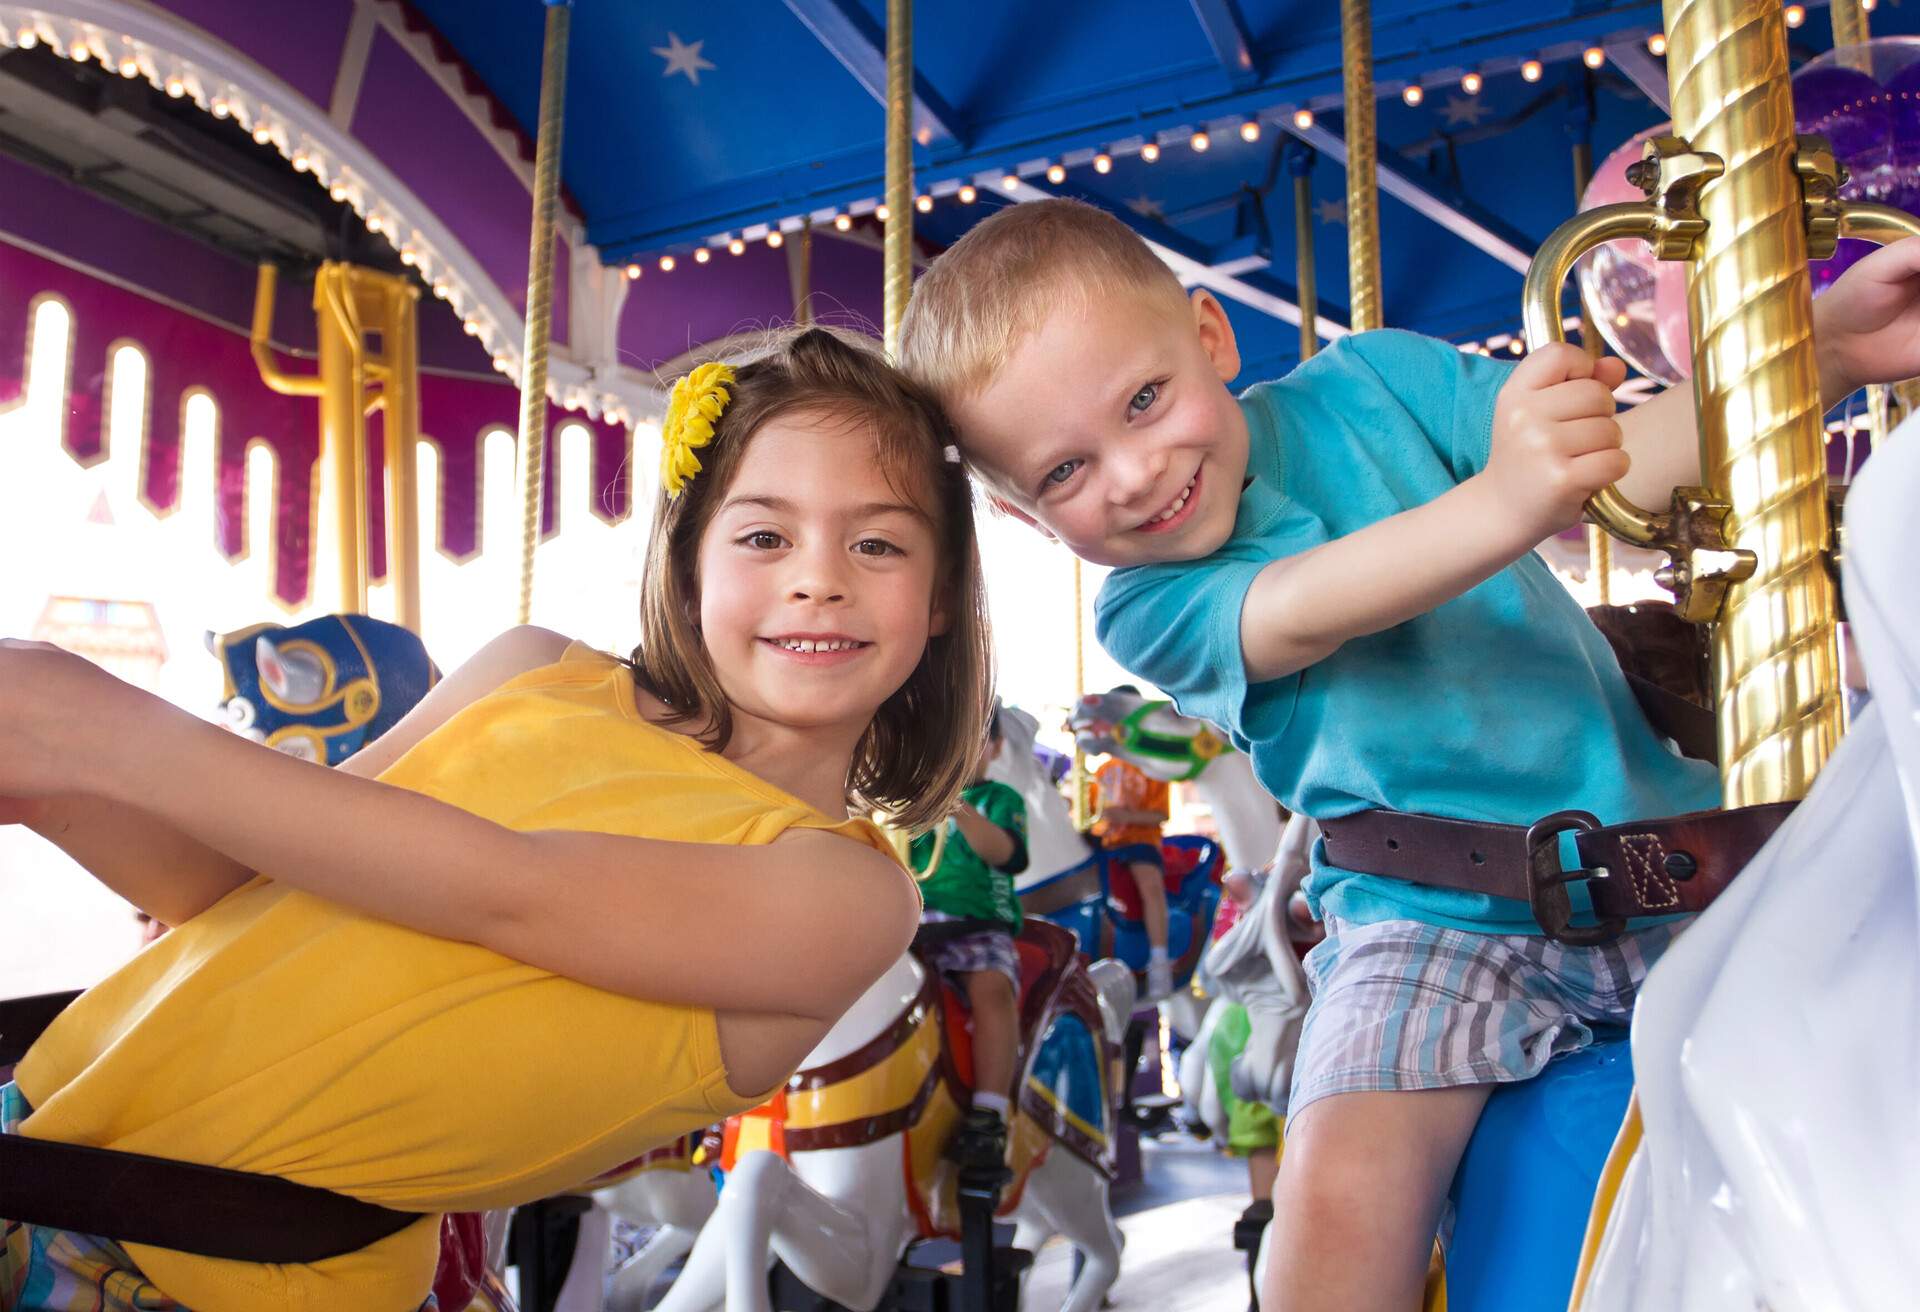 THEME_PEOPLE_KIDS-AT-A-CAROUSEL_GettyImages-151655247